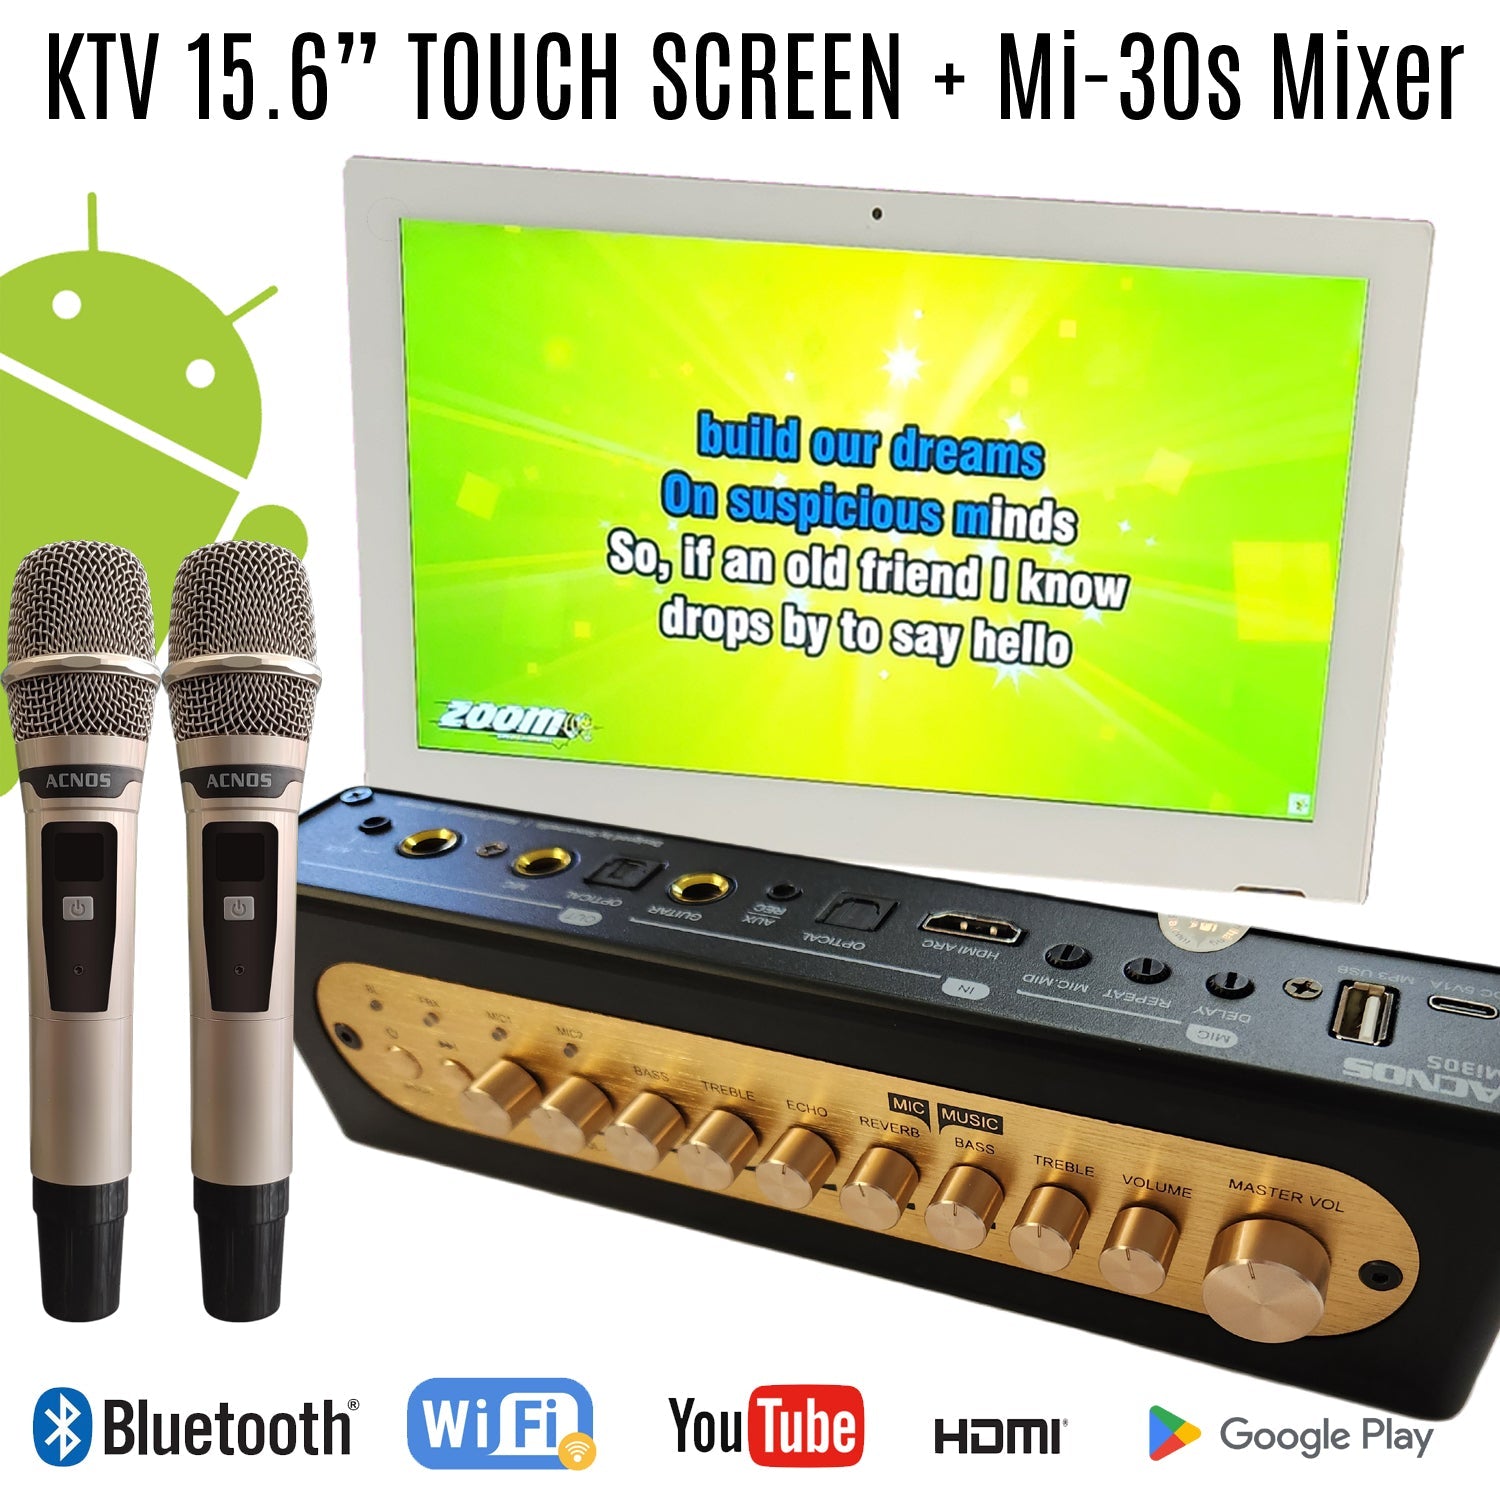 15.6" Karaoke Touch Screen System + ACNOS Mi-30s Mixer (with 2 UHF Wireless Microphones) - Karaoke Home Entertainment